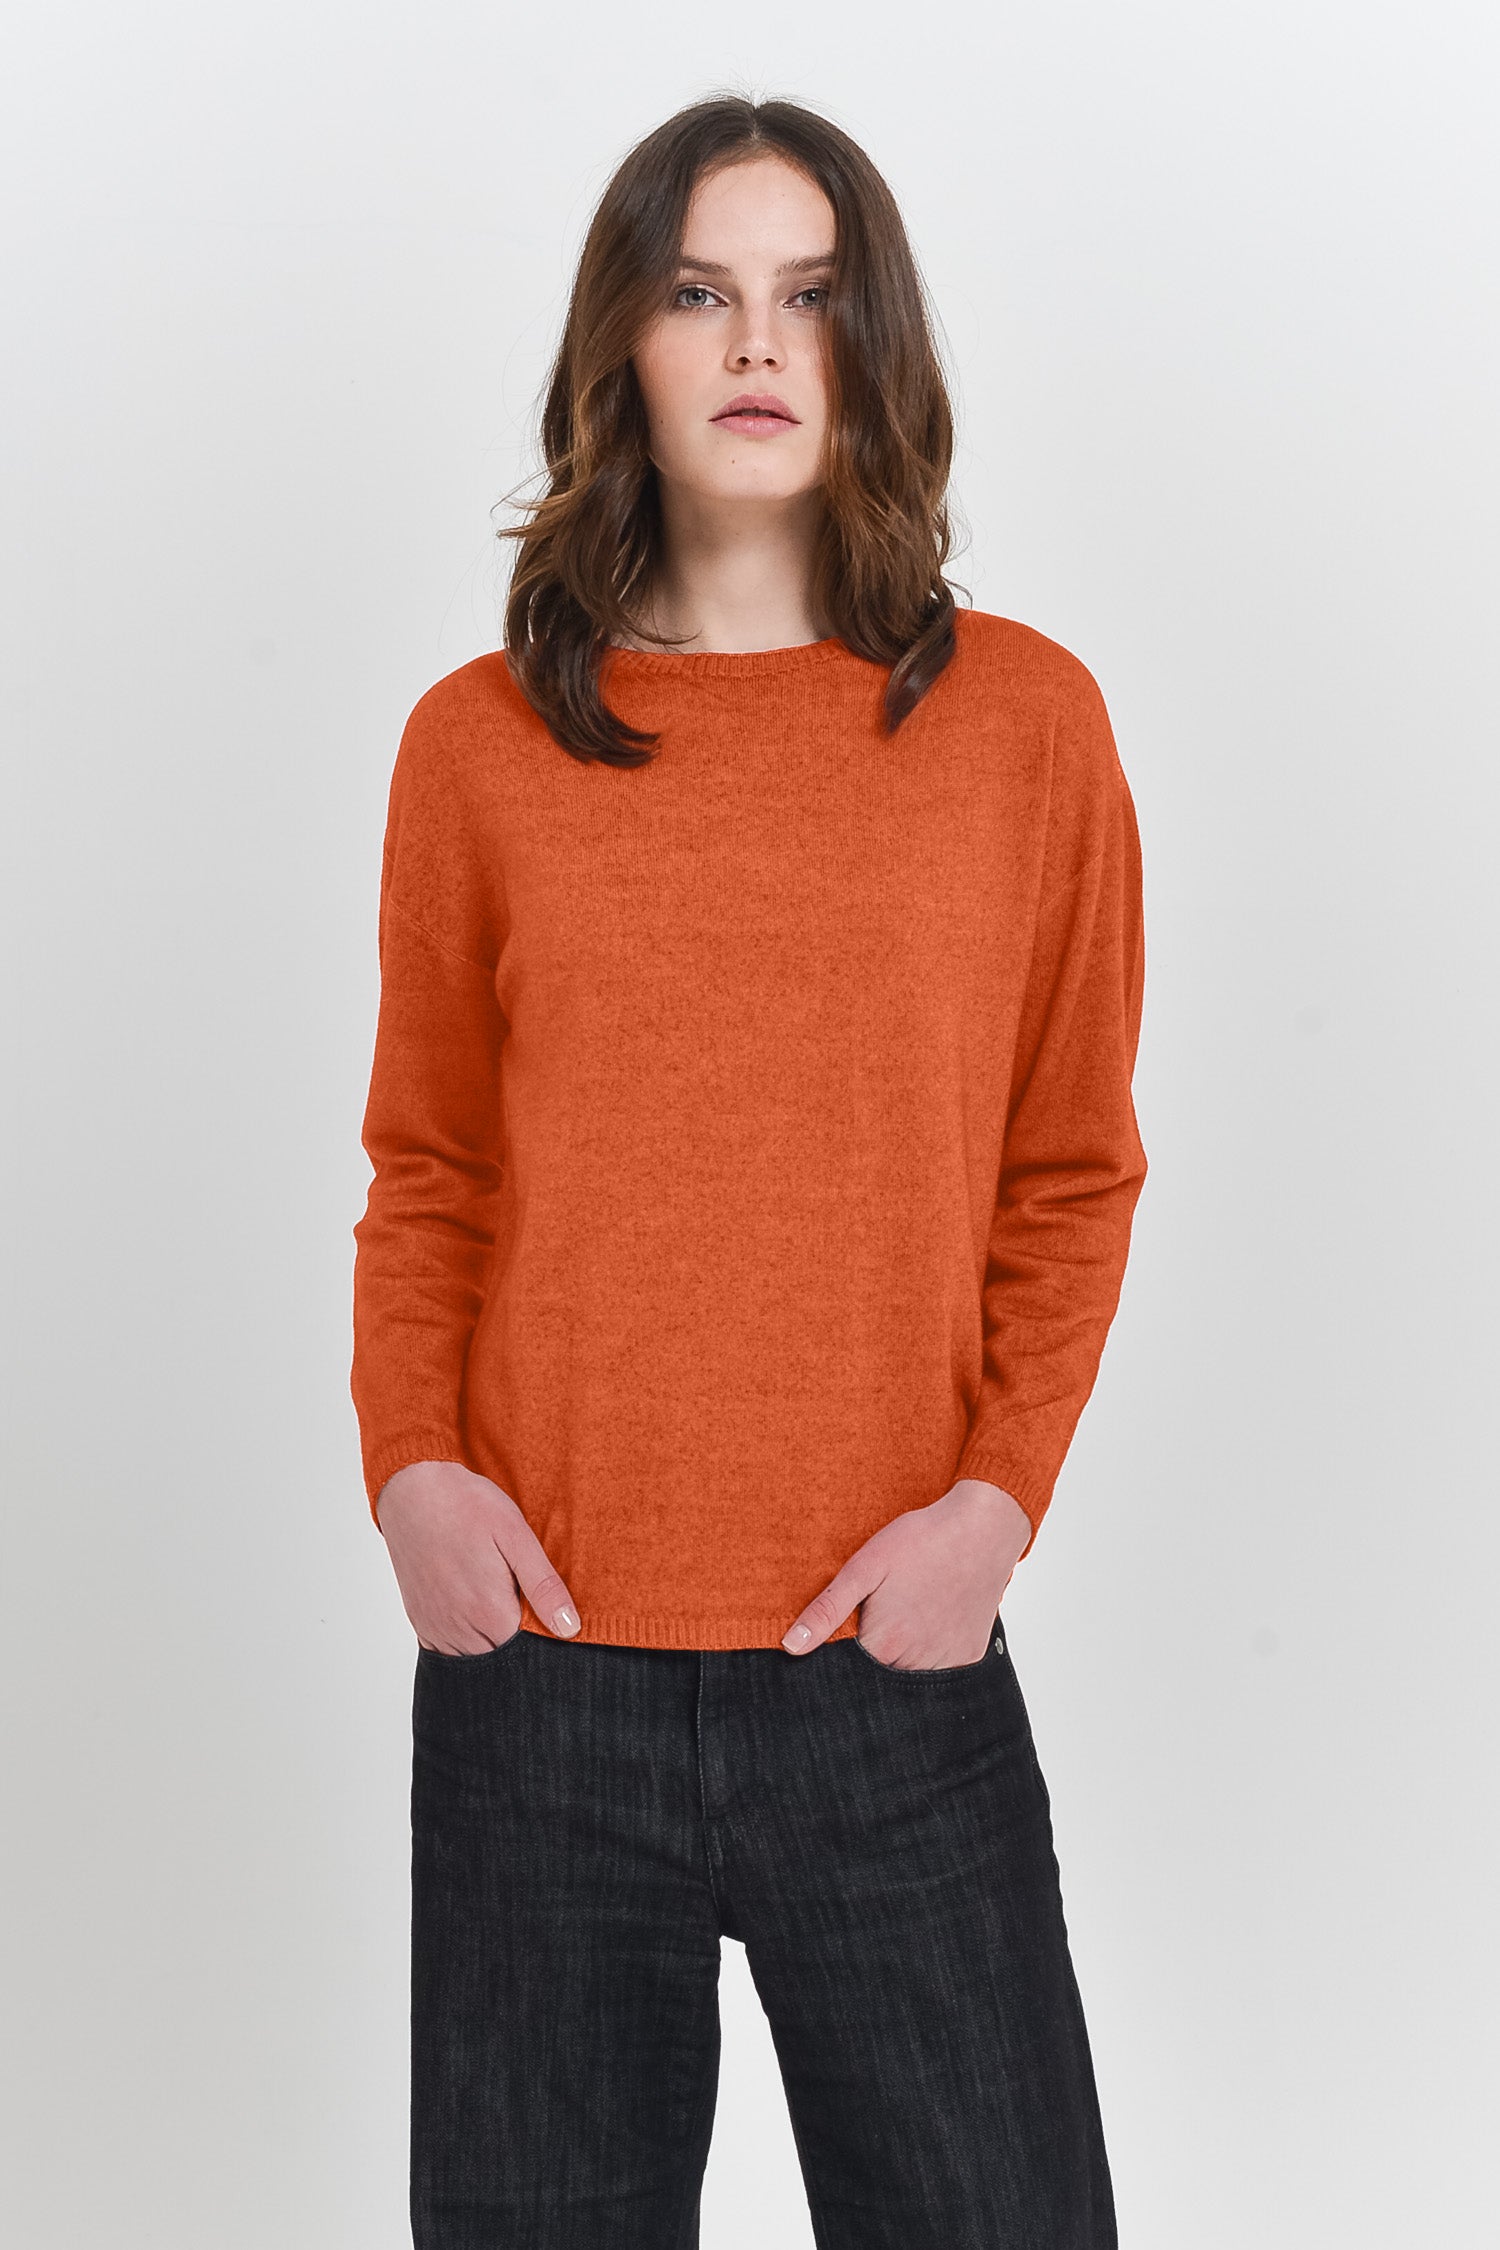 Reay Comfy Sweater - Persimmon